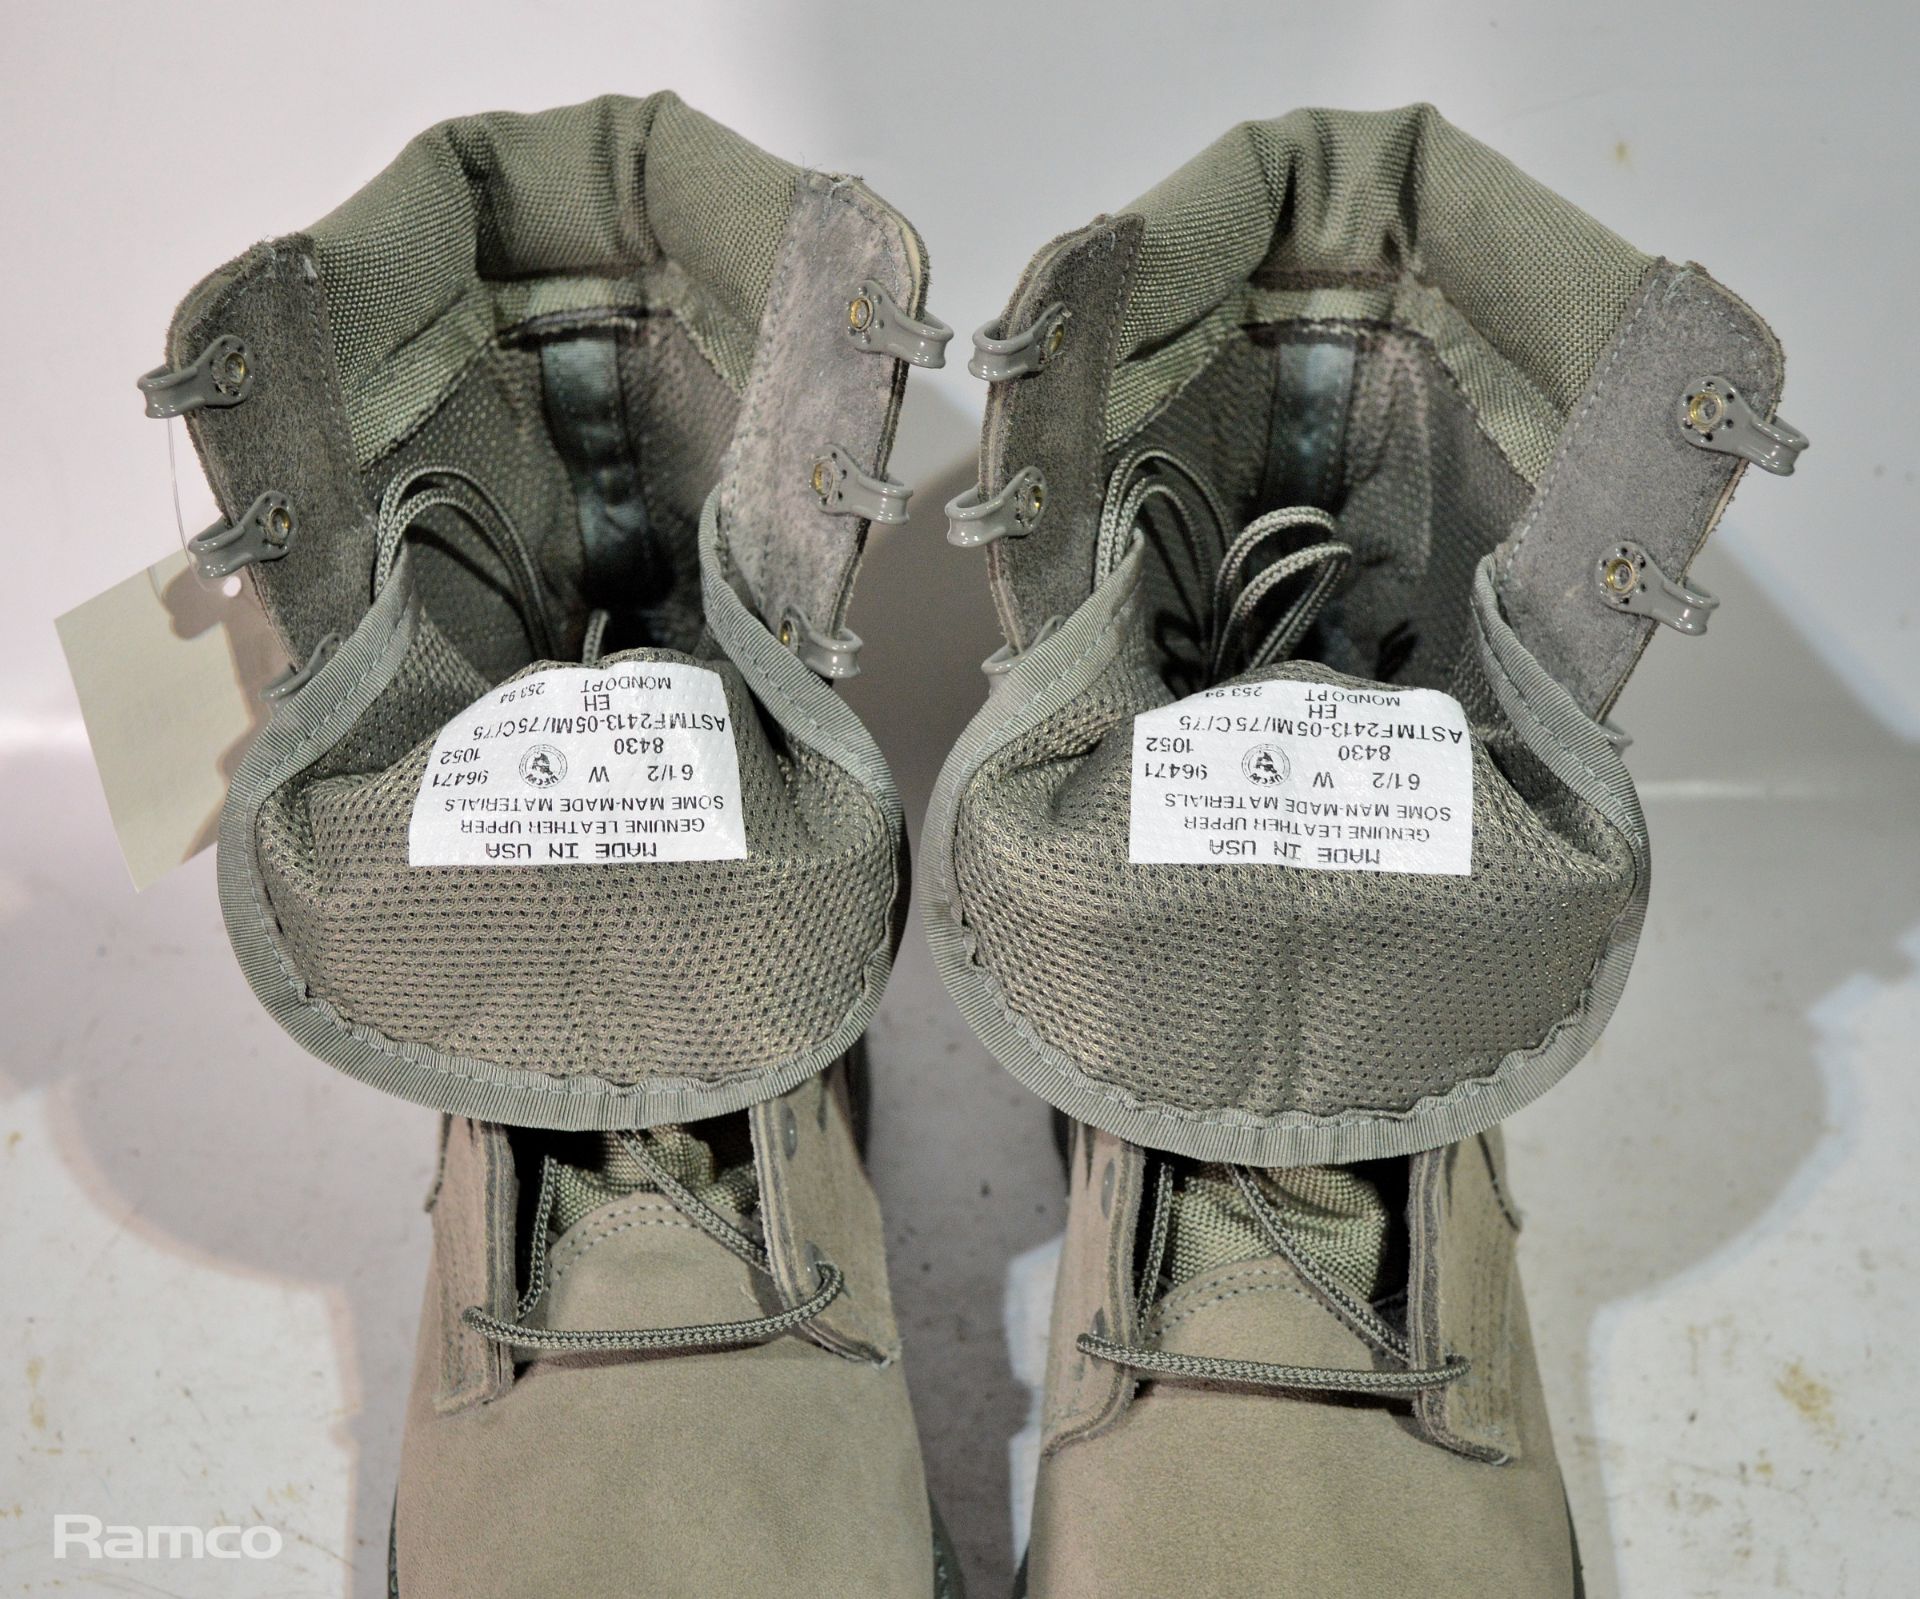 Thorogood Hot Weather Boots - 6 1/2 W - Image 2 of 2